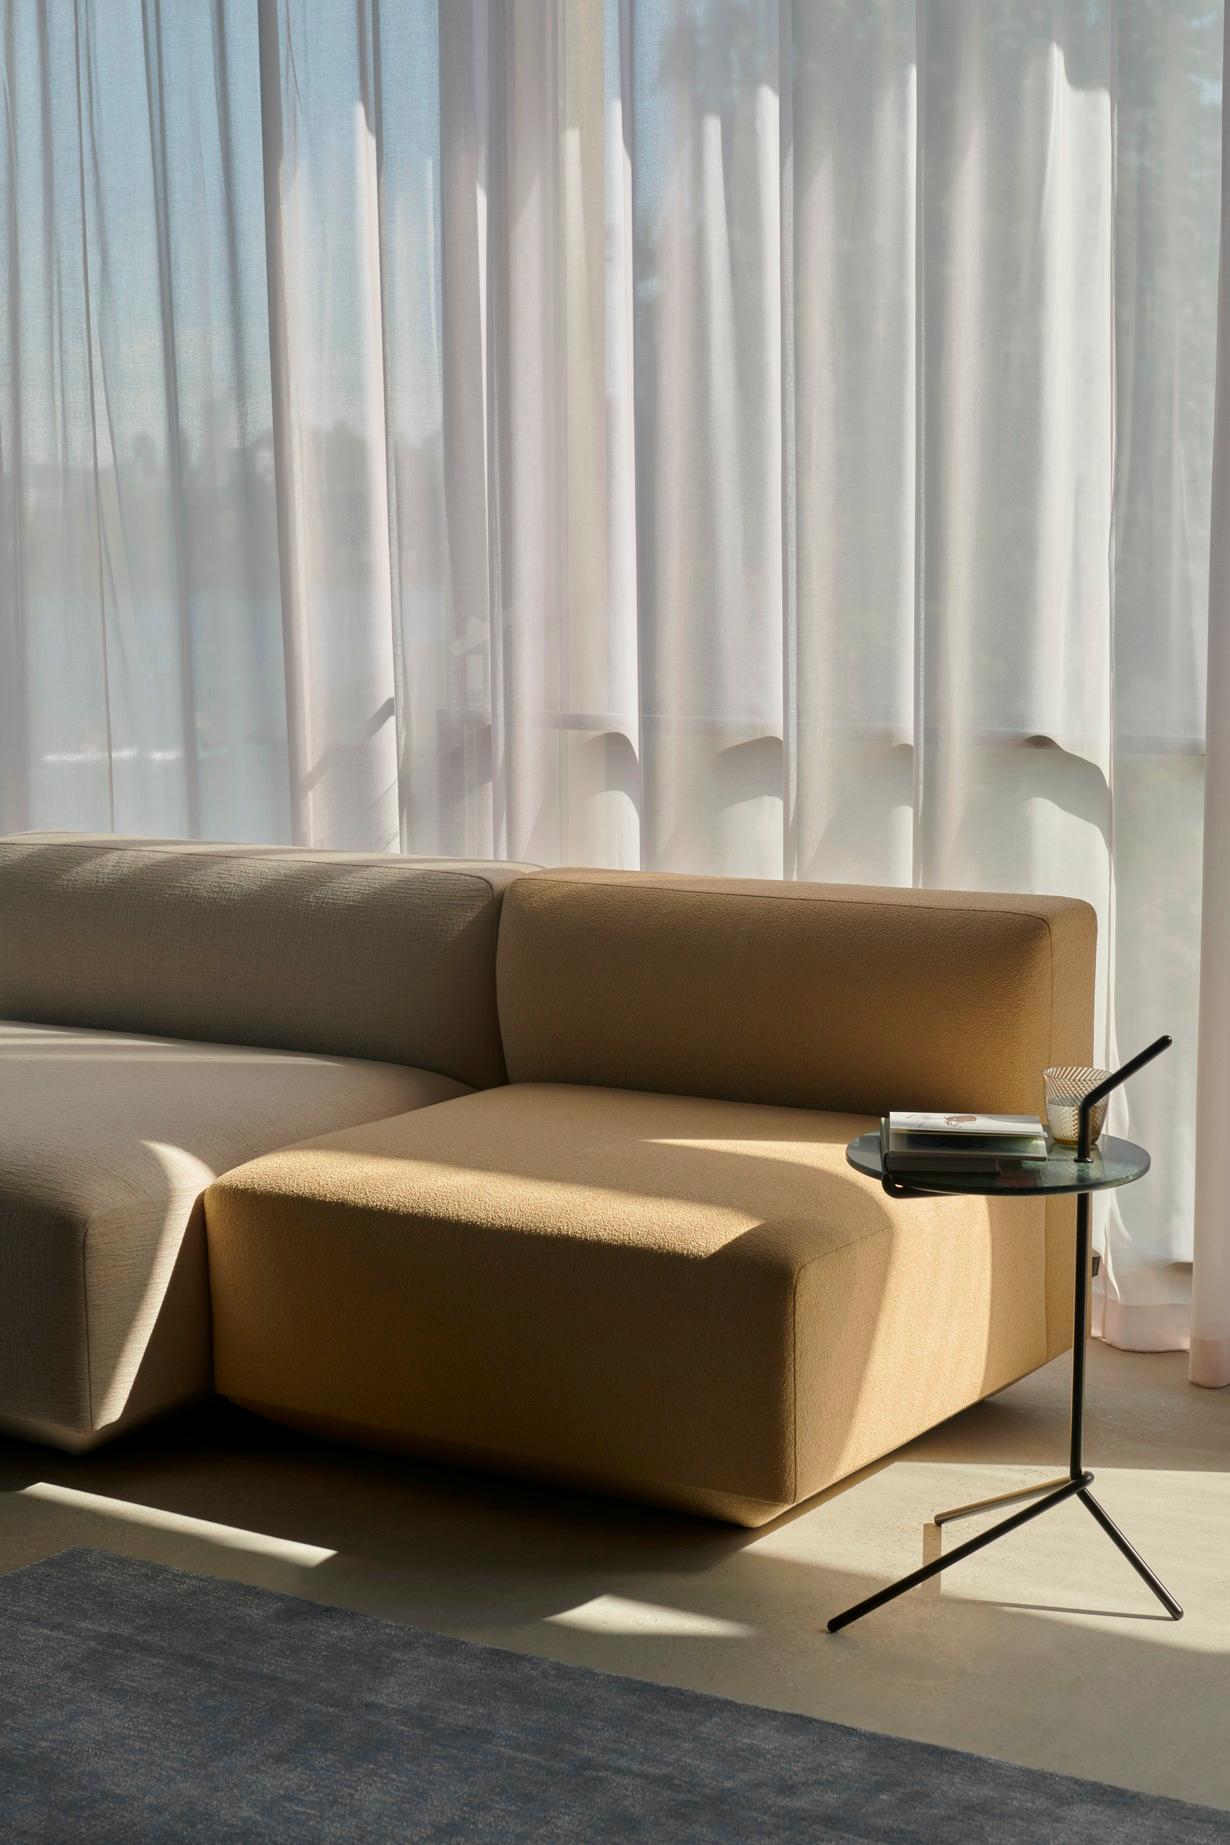 The German word for “hold, stay and last”, Halten is designed to be a cherished companion for everyday life. In a home or hospitality setting, you can easily take it with you to pair with an armchair, sofa or pouf. 
The design reflects Herkner’s